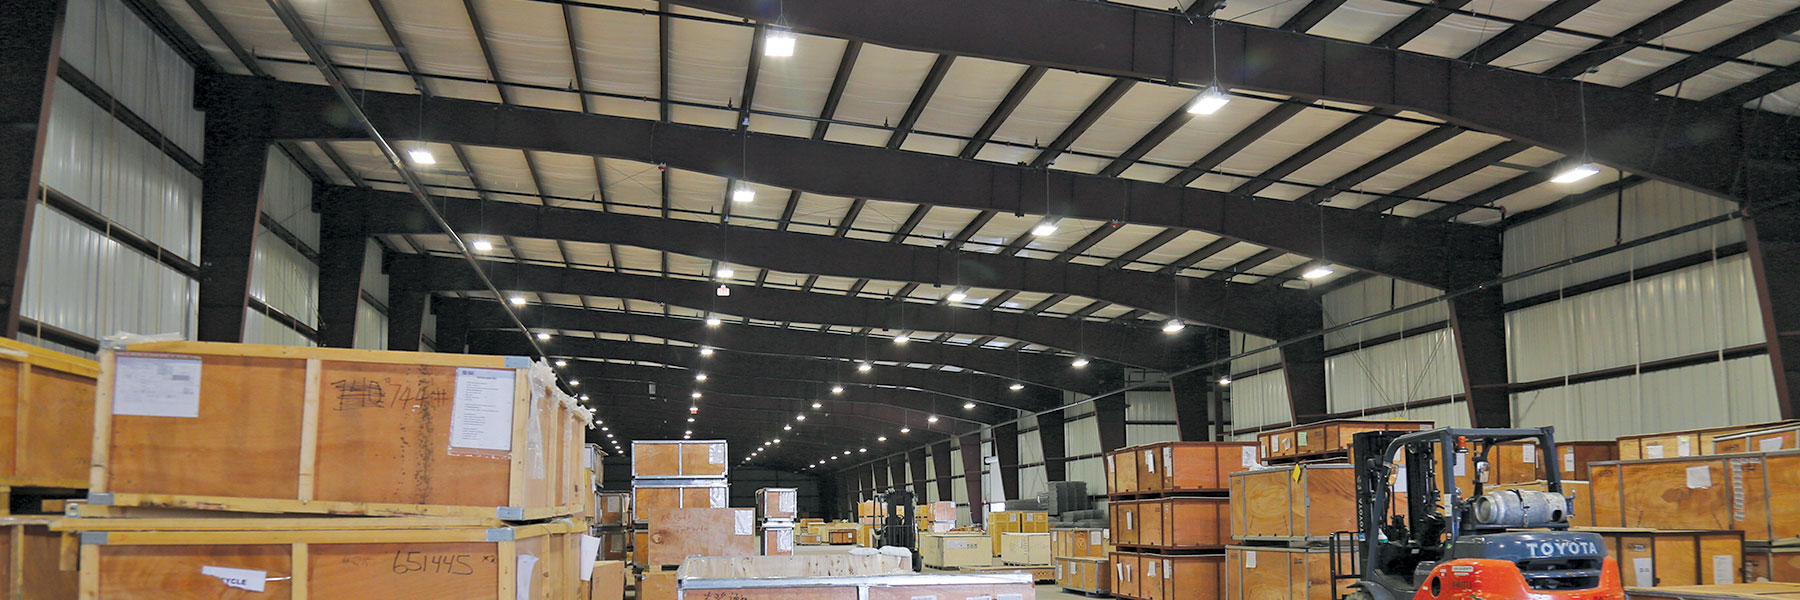 Warehouse Beam Building with Lighting